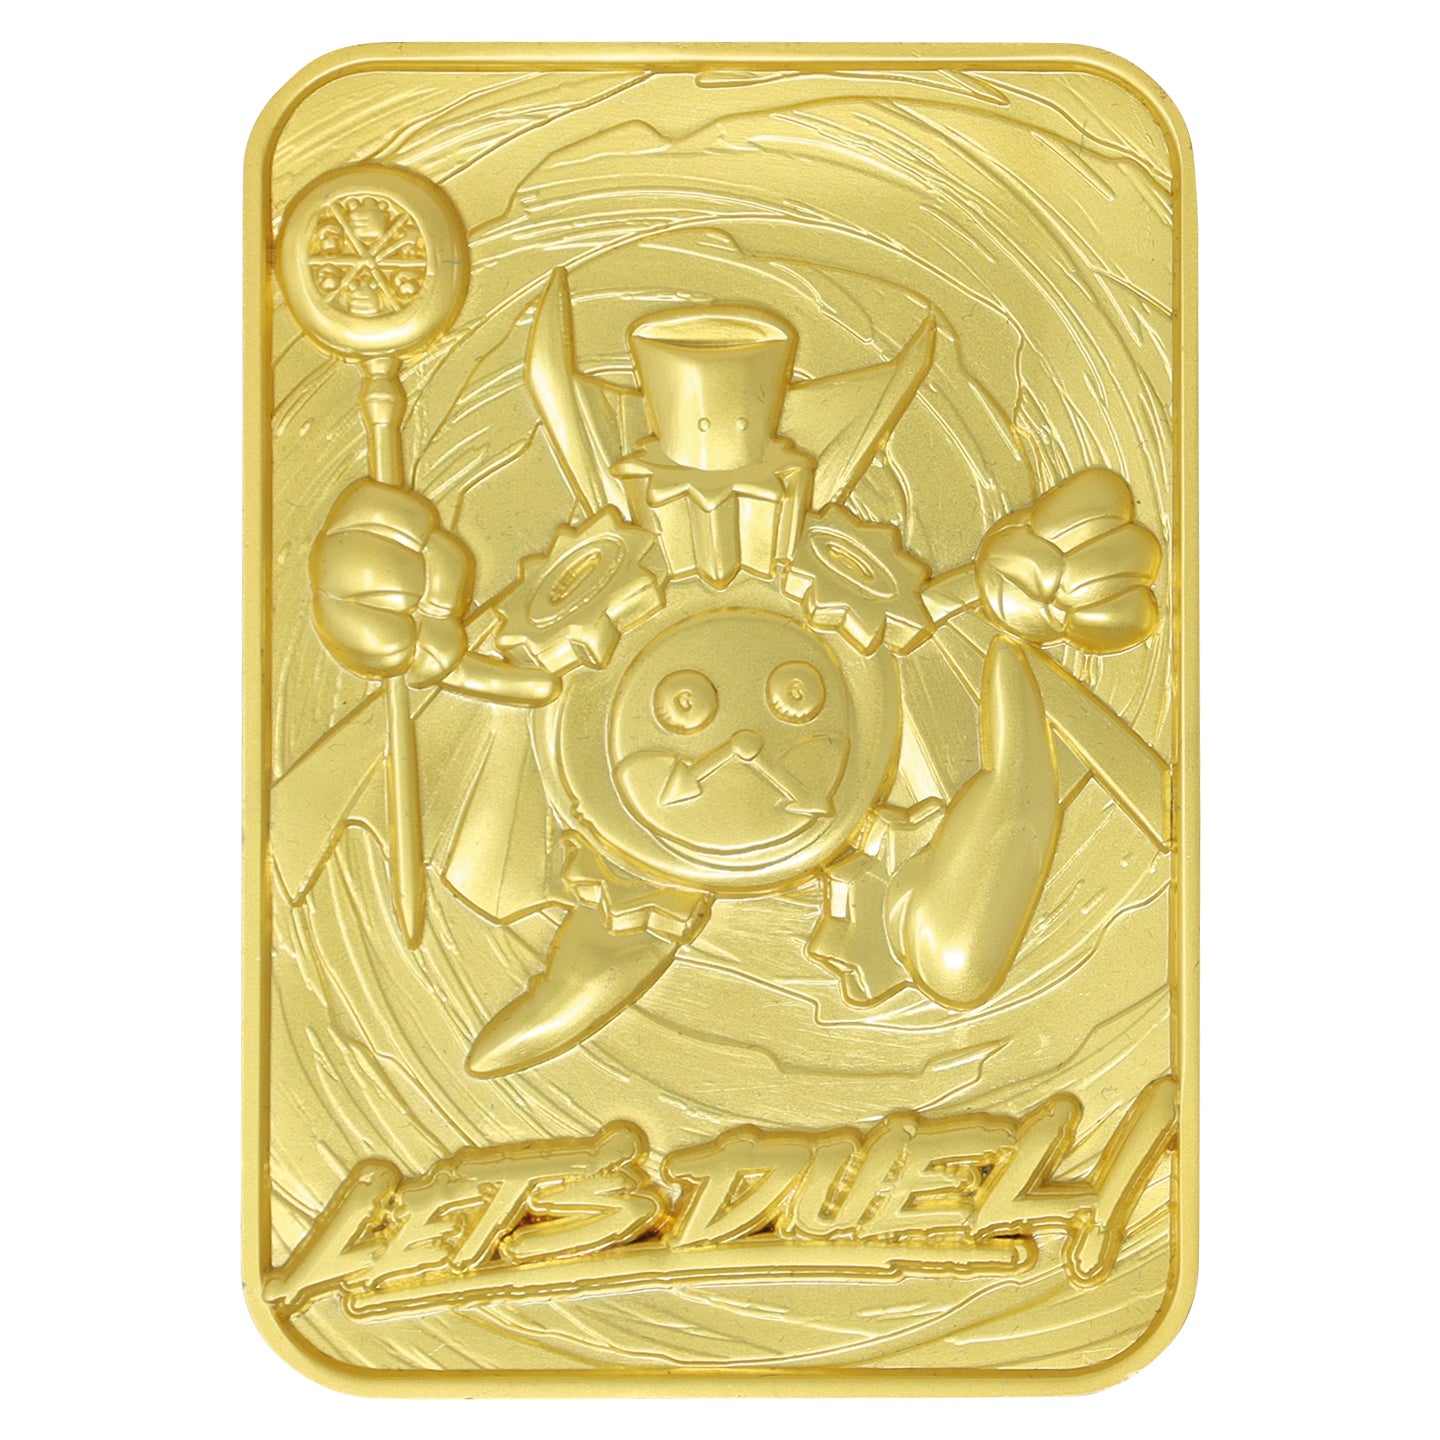 Yu-Gi-Oh! Limited Edition 24k Gold Plated Time Wizard Metal Card